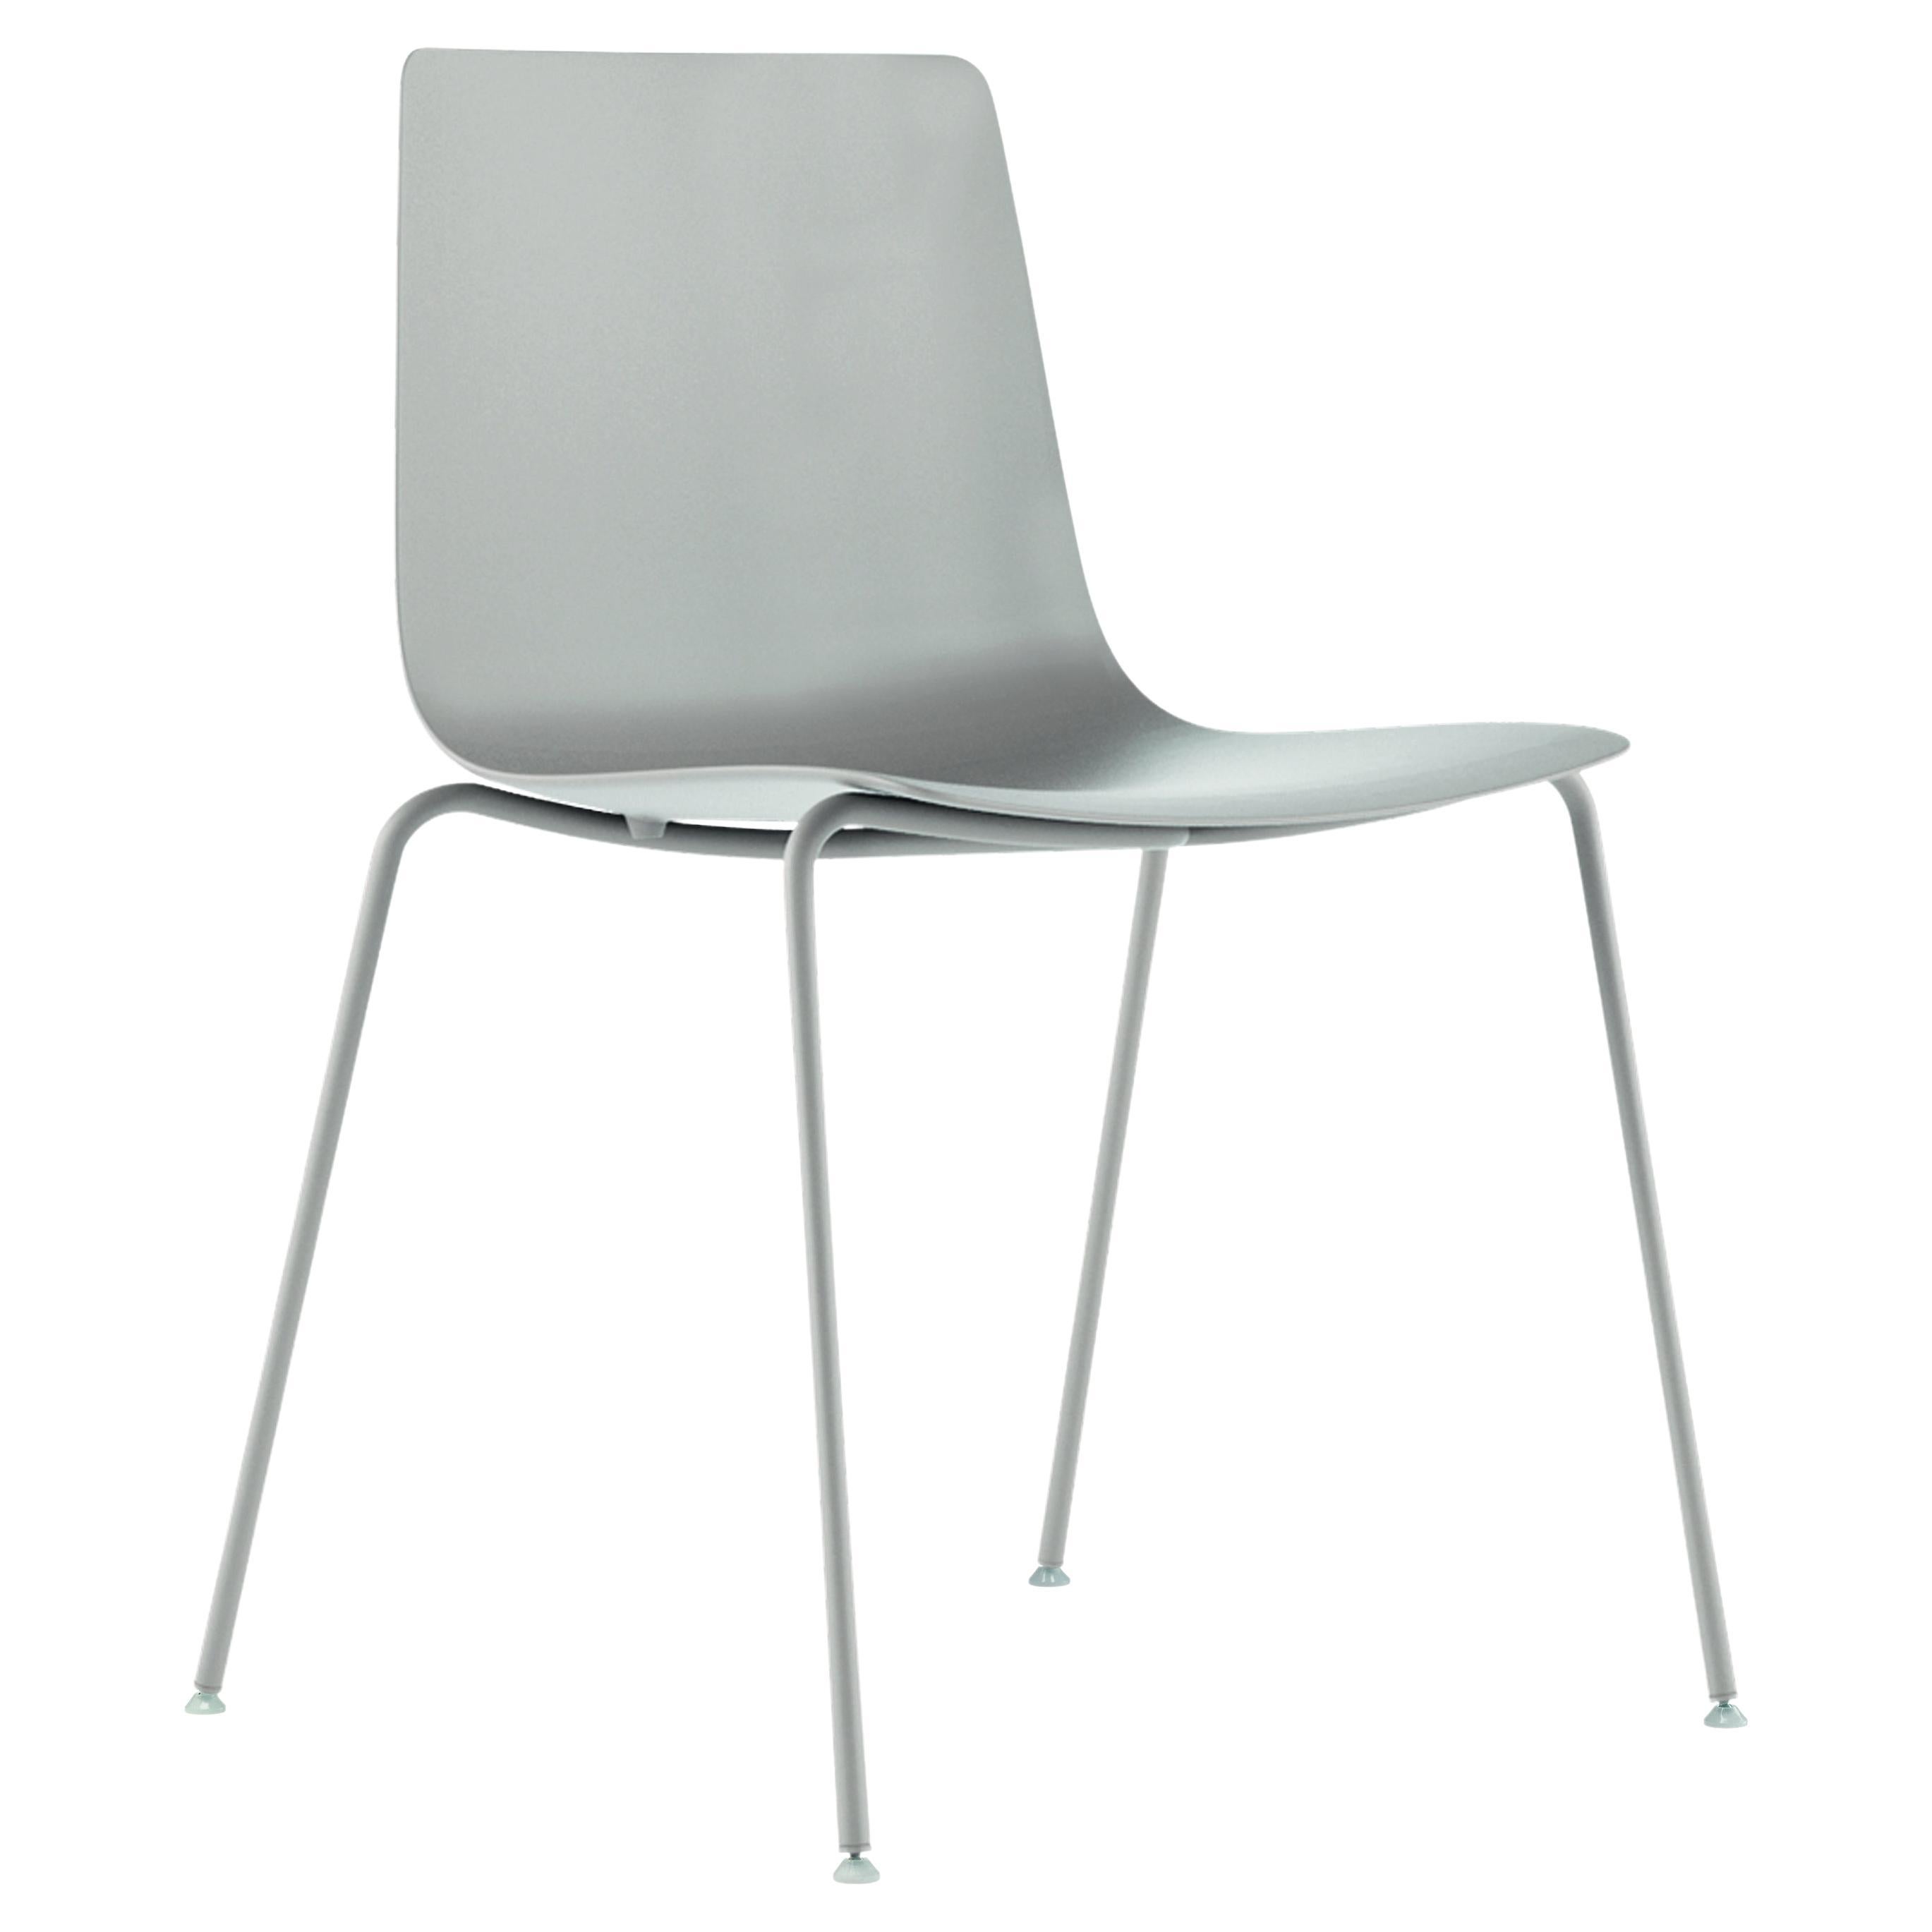 Alias 89C Slim Chair 4 in Light Grey Polypropylene Seat & Lacquered Steel Frame